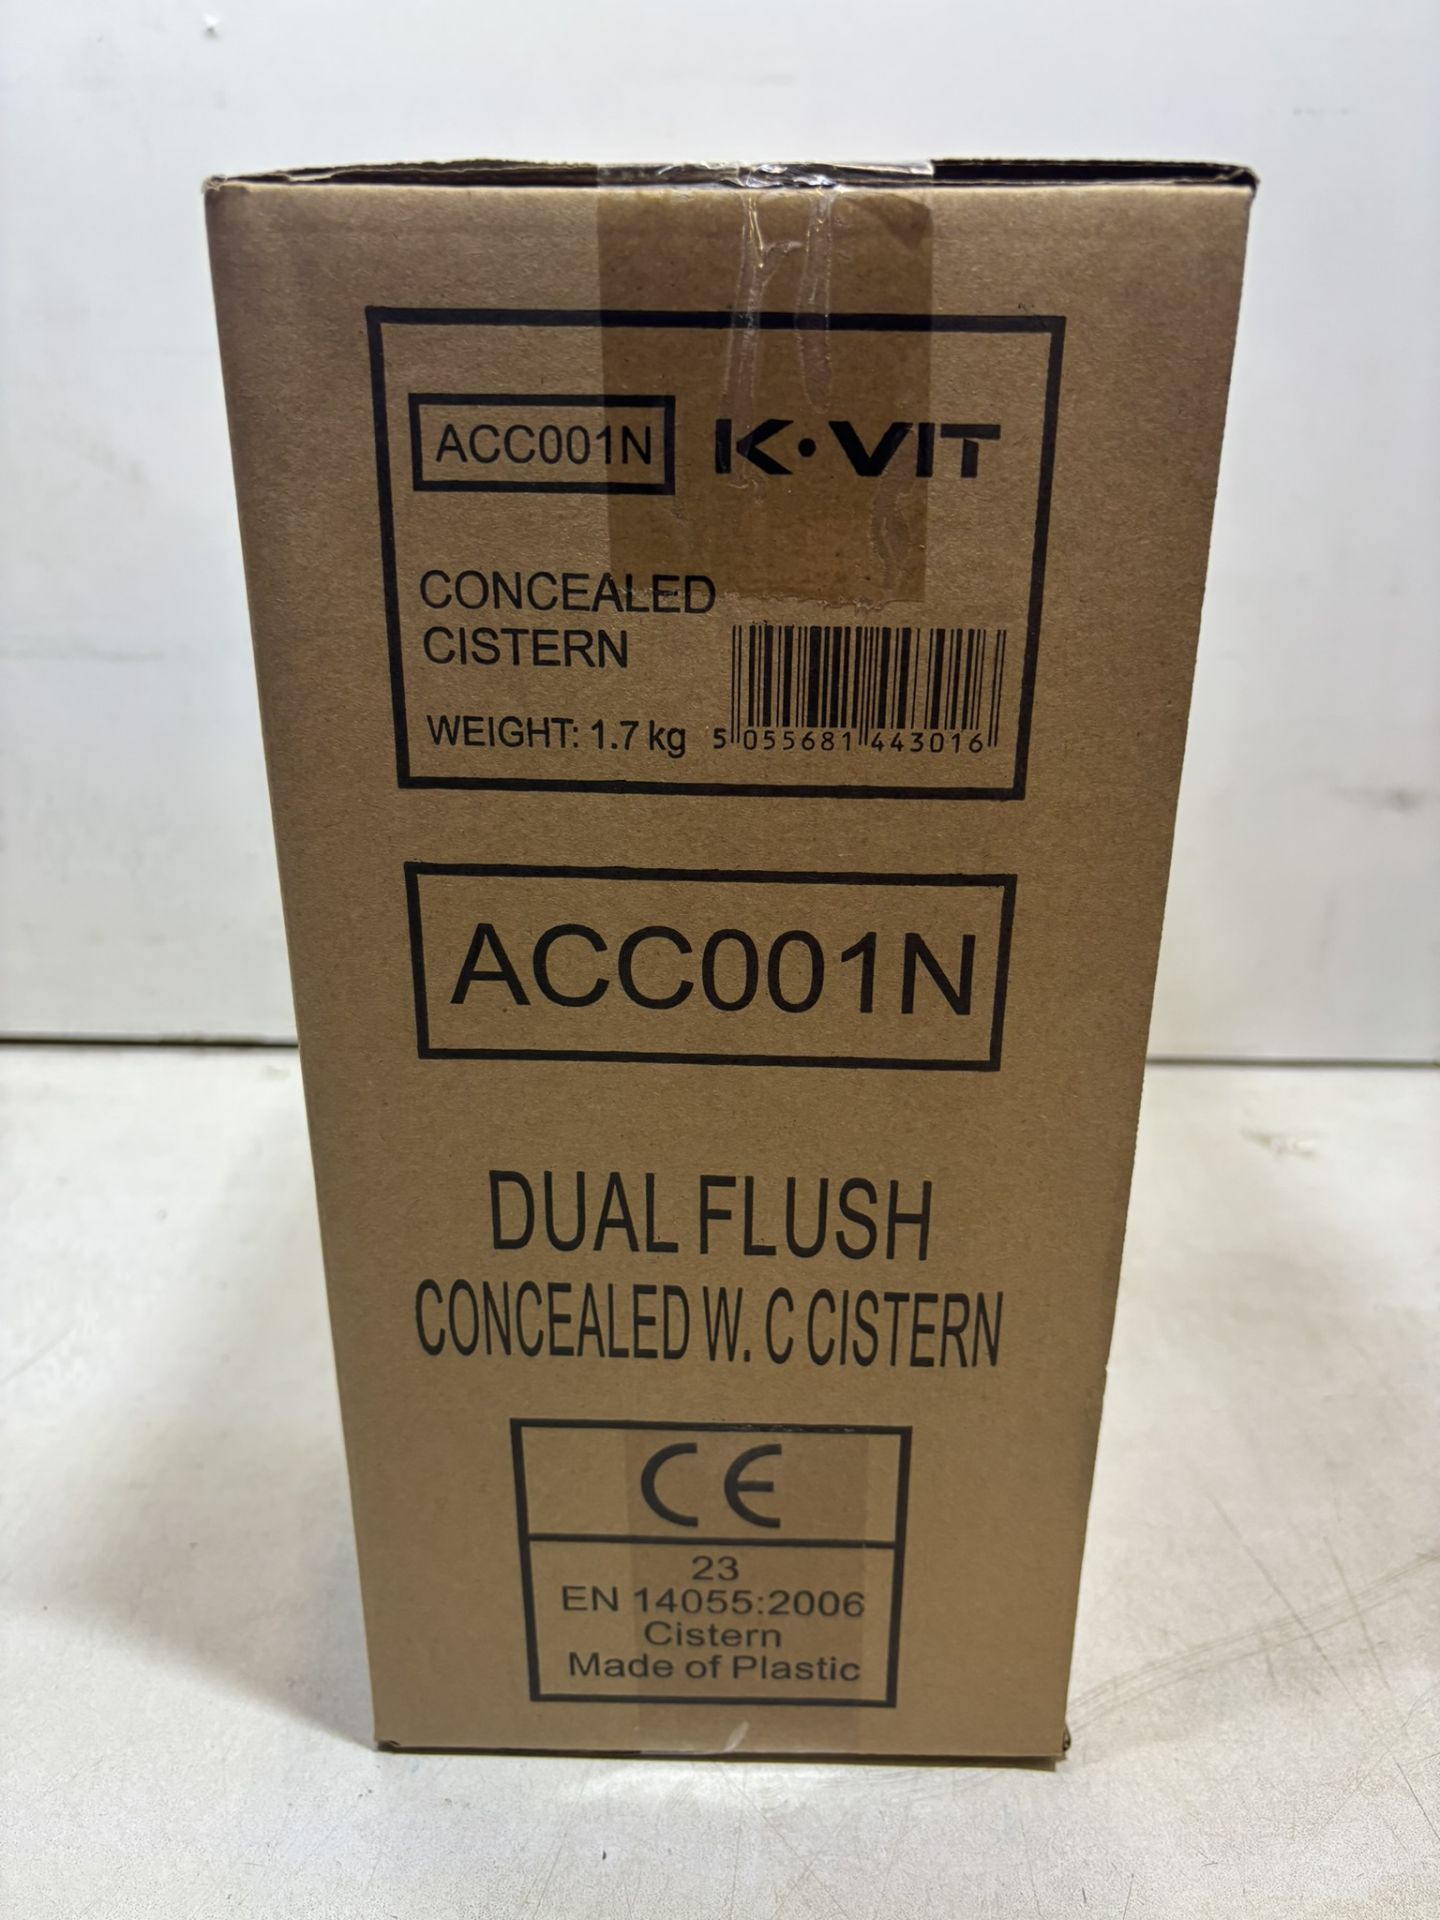 3 x Kartell K-Vit ACC001N Concealed Cistern Top Or Front Access - Image 3 of 3